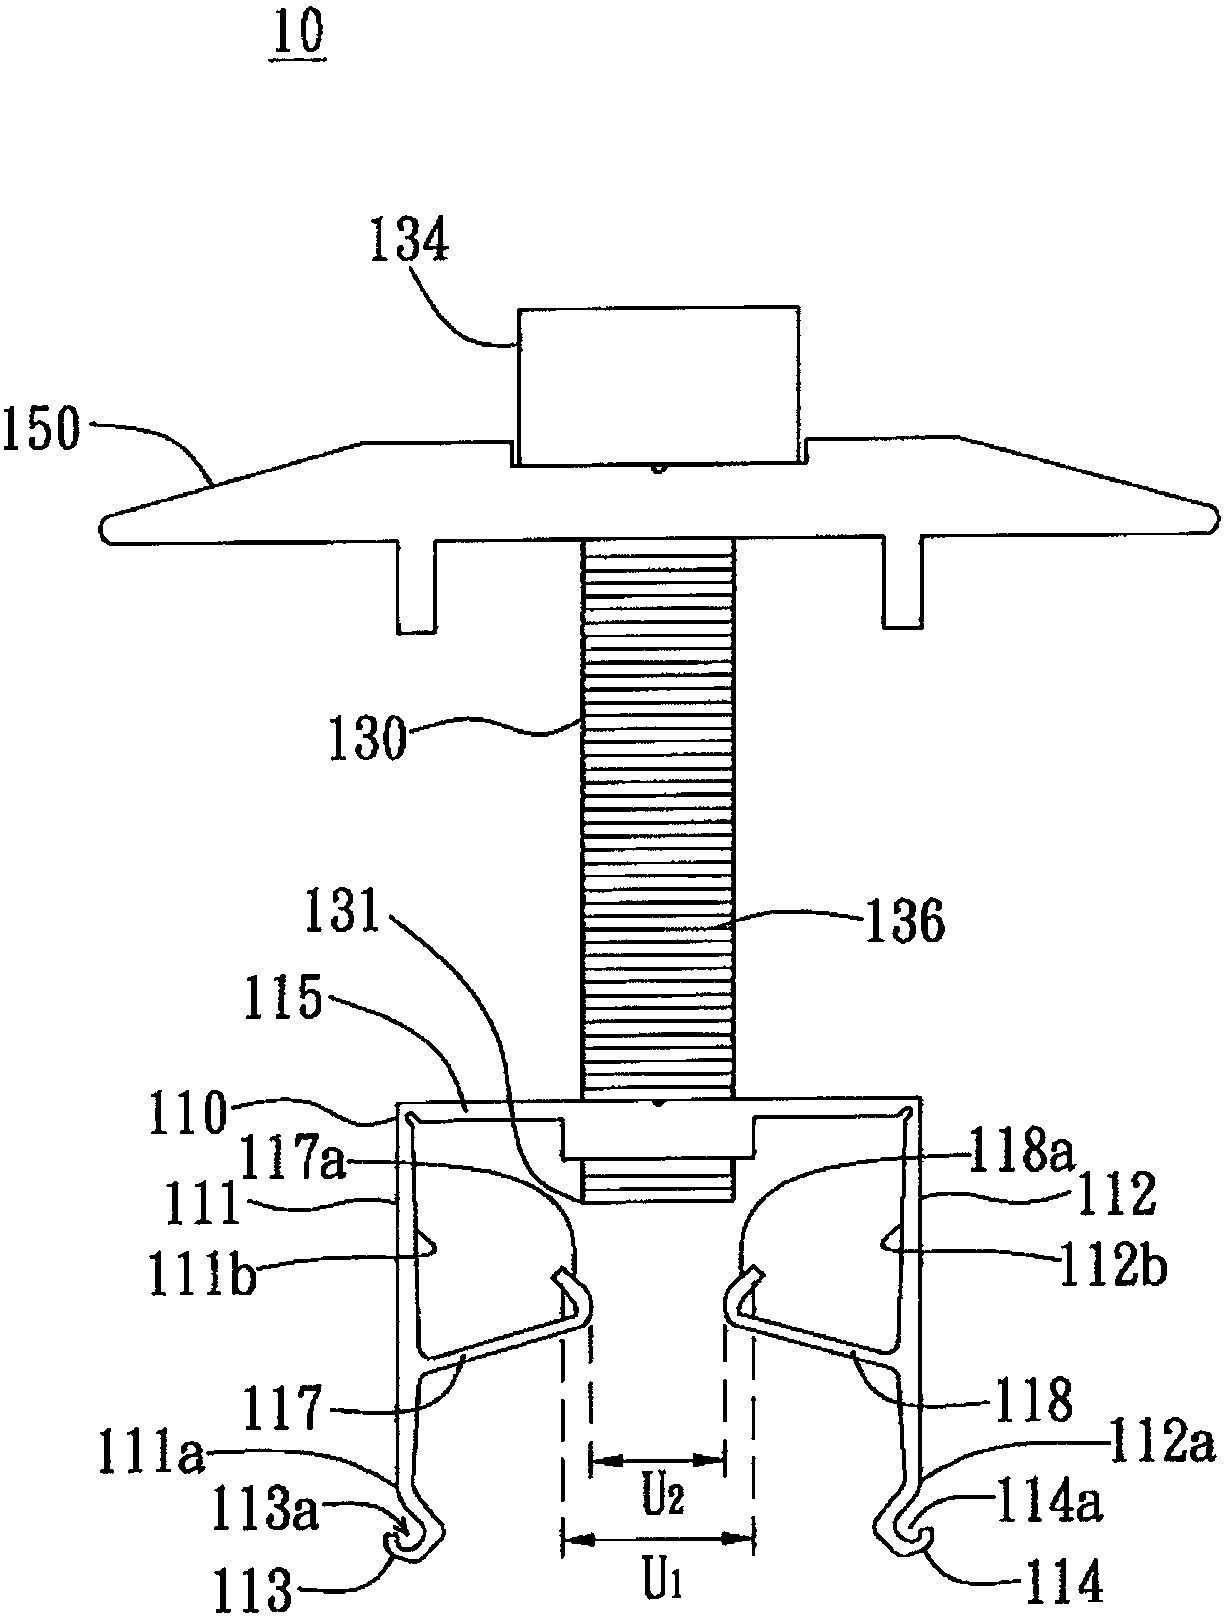 Clamp and plate component assembly system with clamp